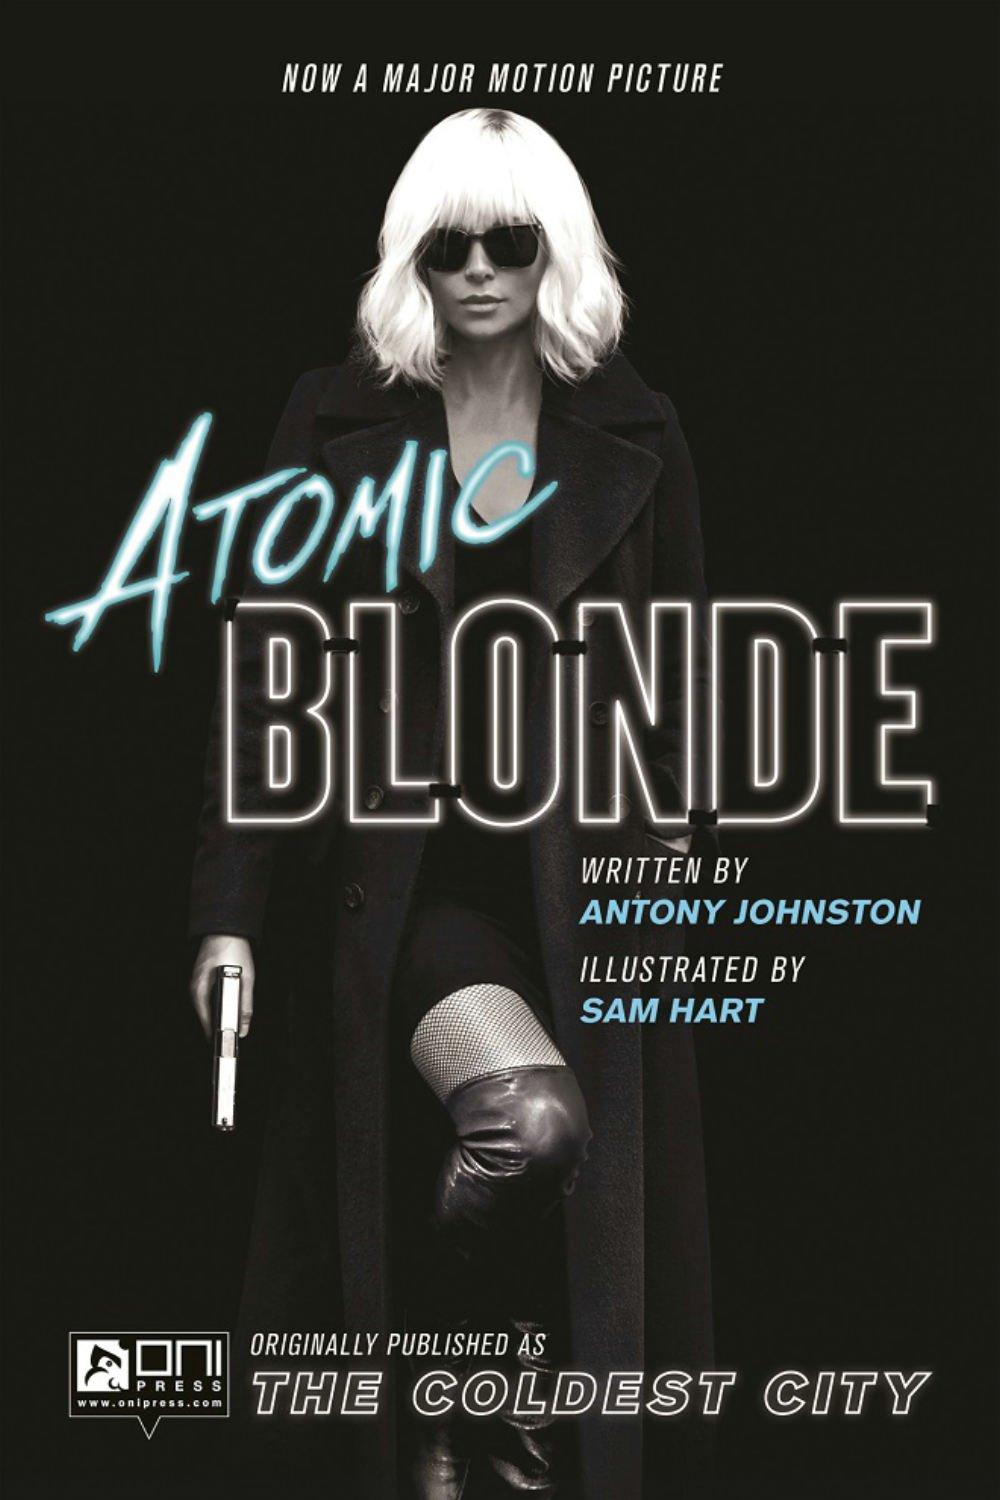 Atomic Blonde: The Coldest City